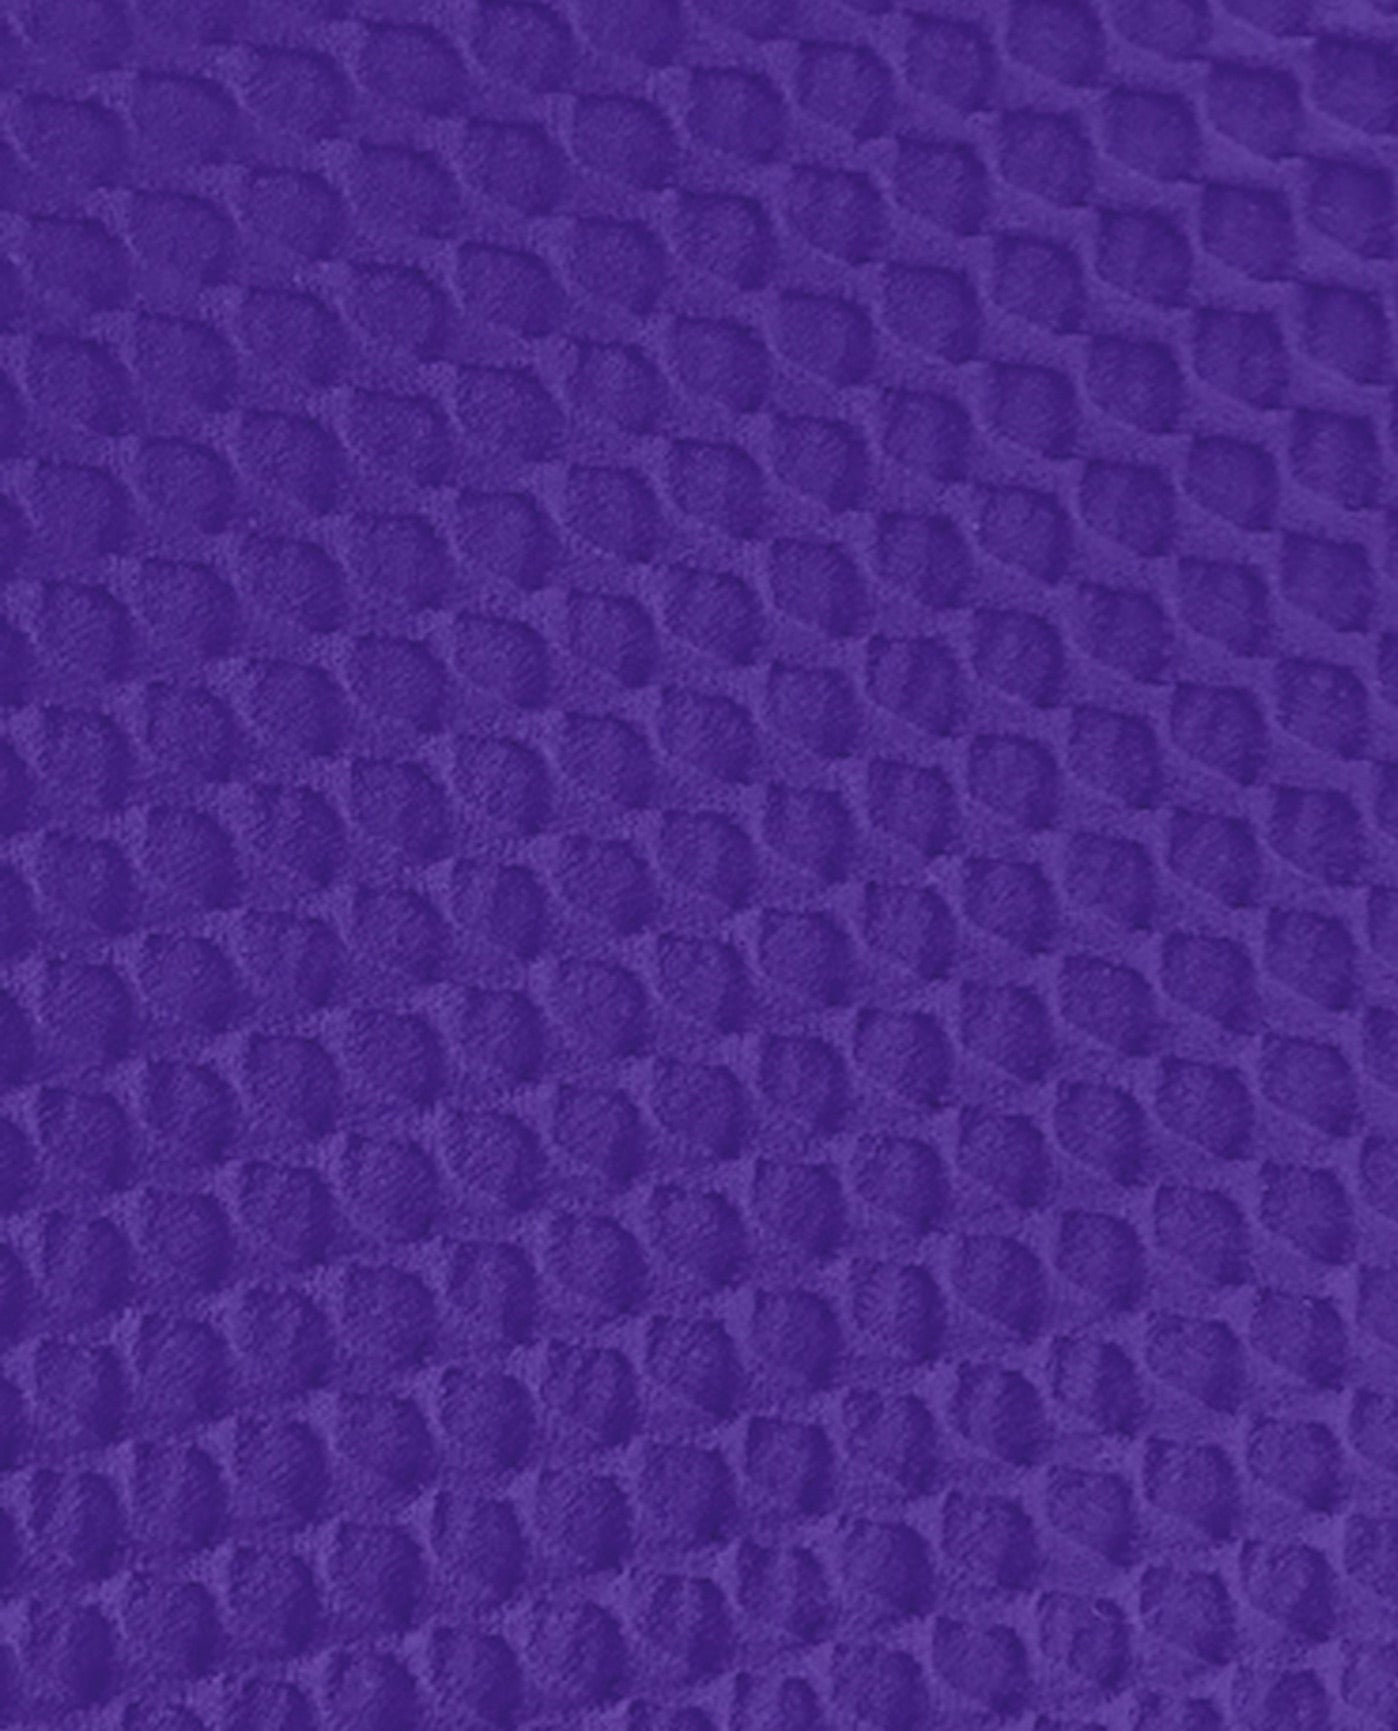 FABRIC SWATCH VIEW OF CHLORINE RESISTANT AQUAMORE SOLID TEXTURED SARONG FRONT MASTECTOMY ONE PIECE SWIMSUIT | 510 AQT TEXTURED PURPLE